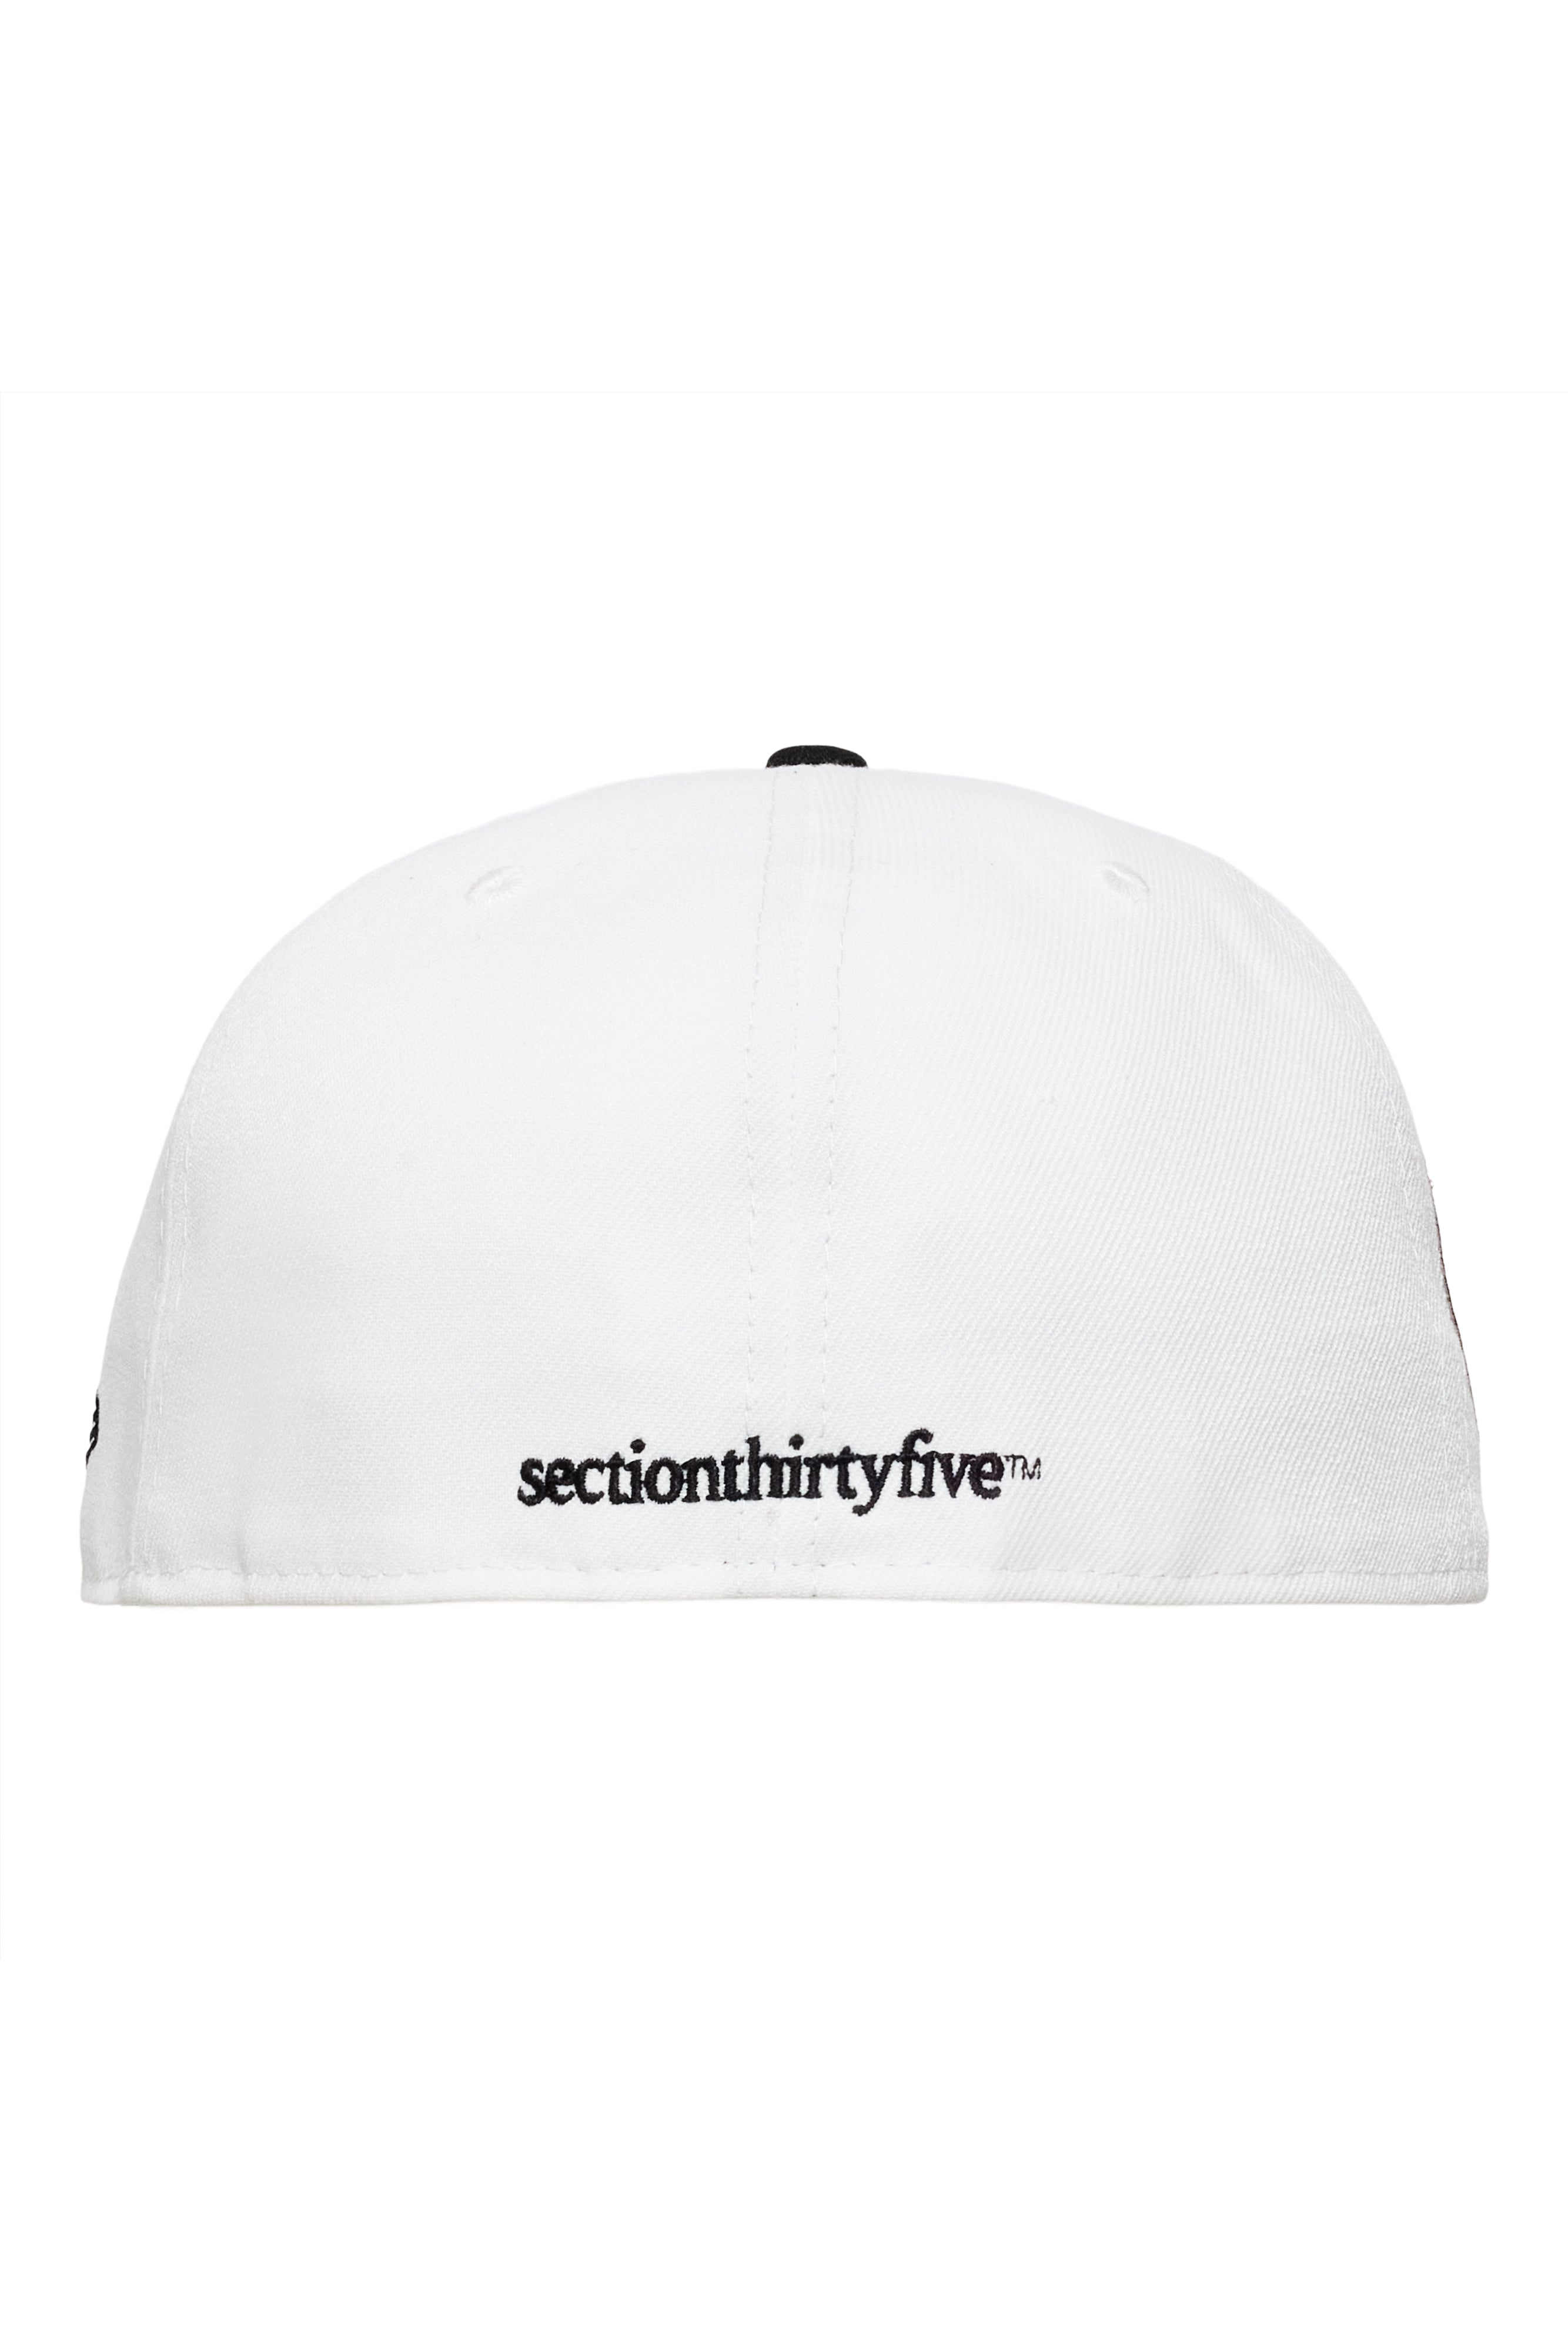 New Era 59FIFTY Talking Feather Side Patch Cap - White/Black